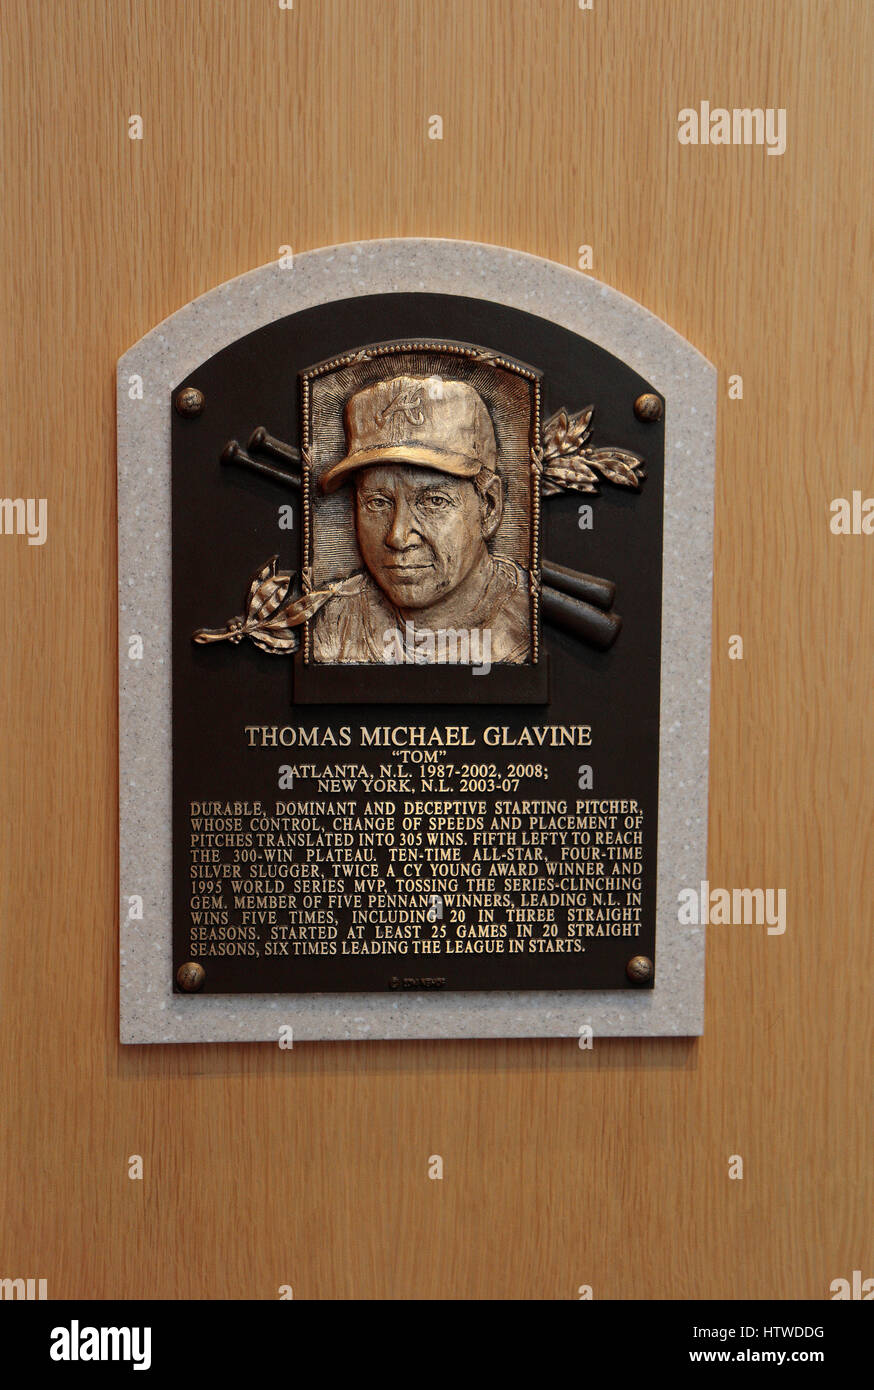 Memorial plaque pitcher Tom Glavine for in the Hall of Fame